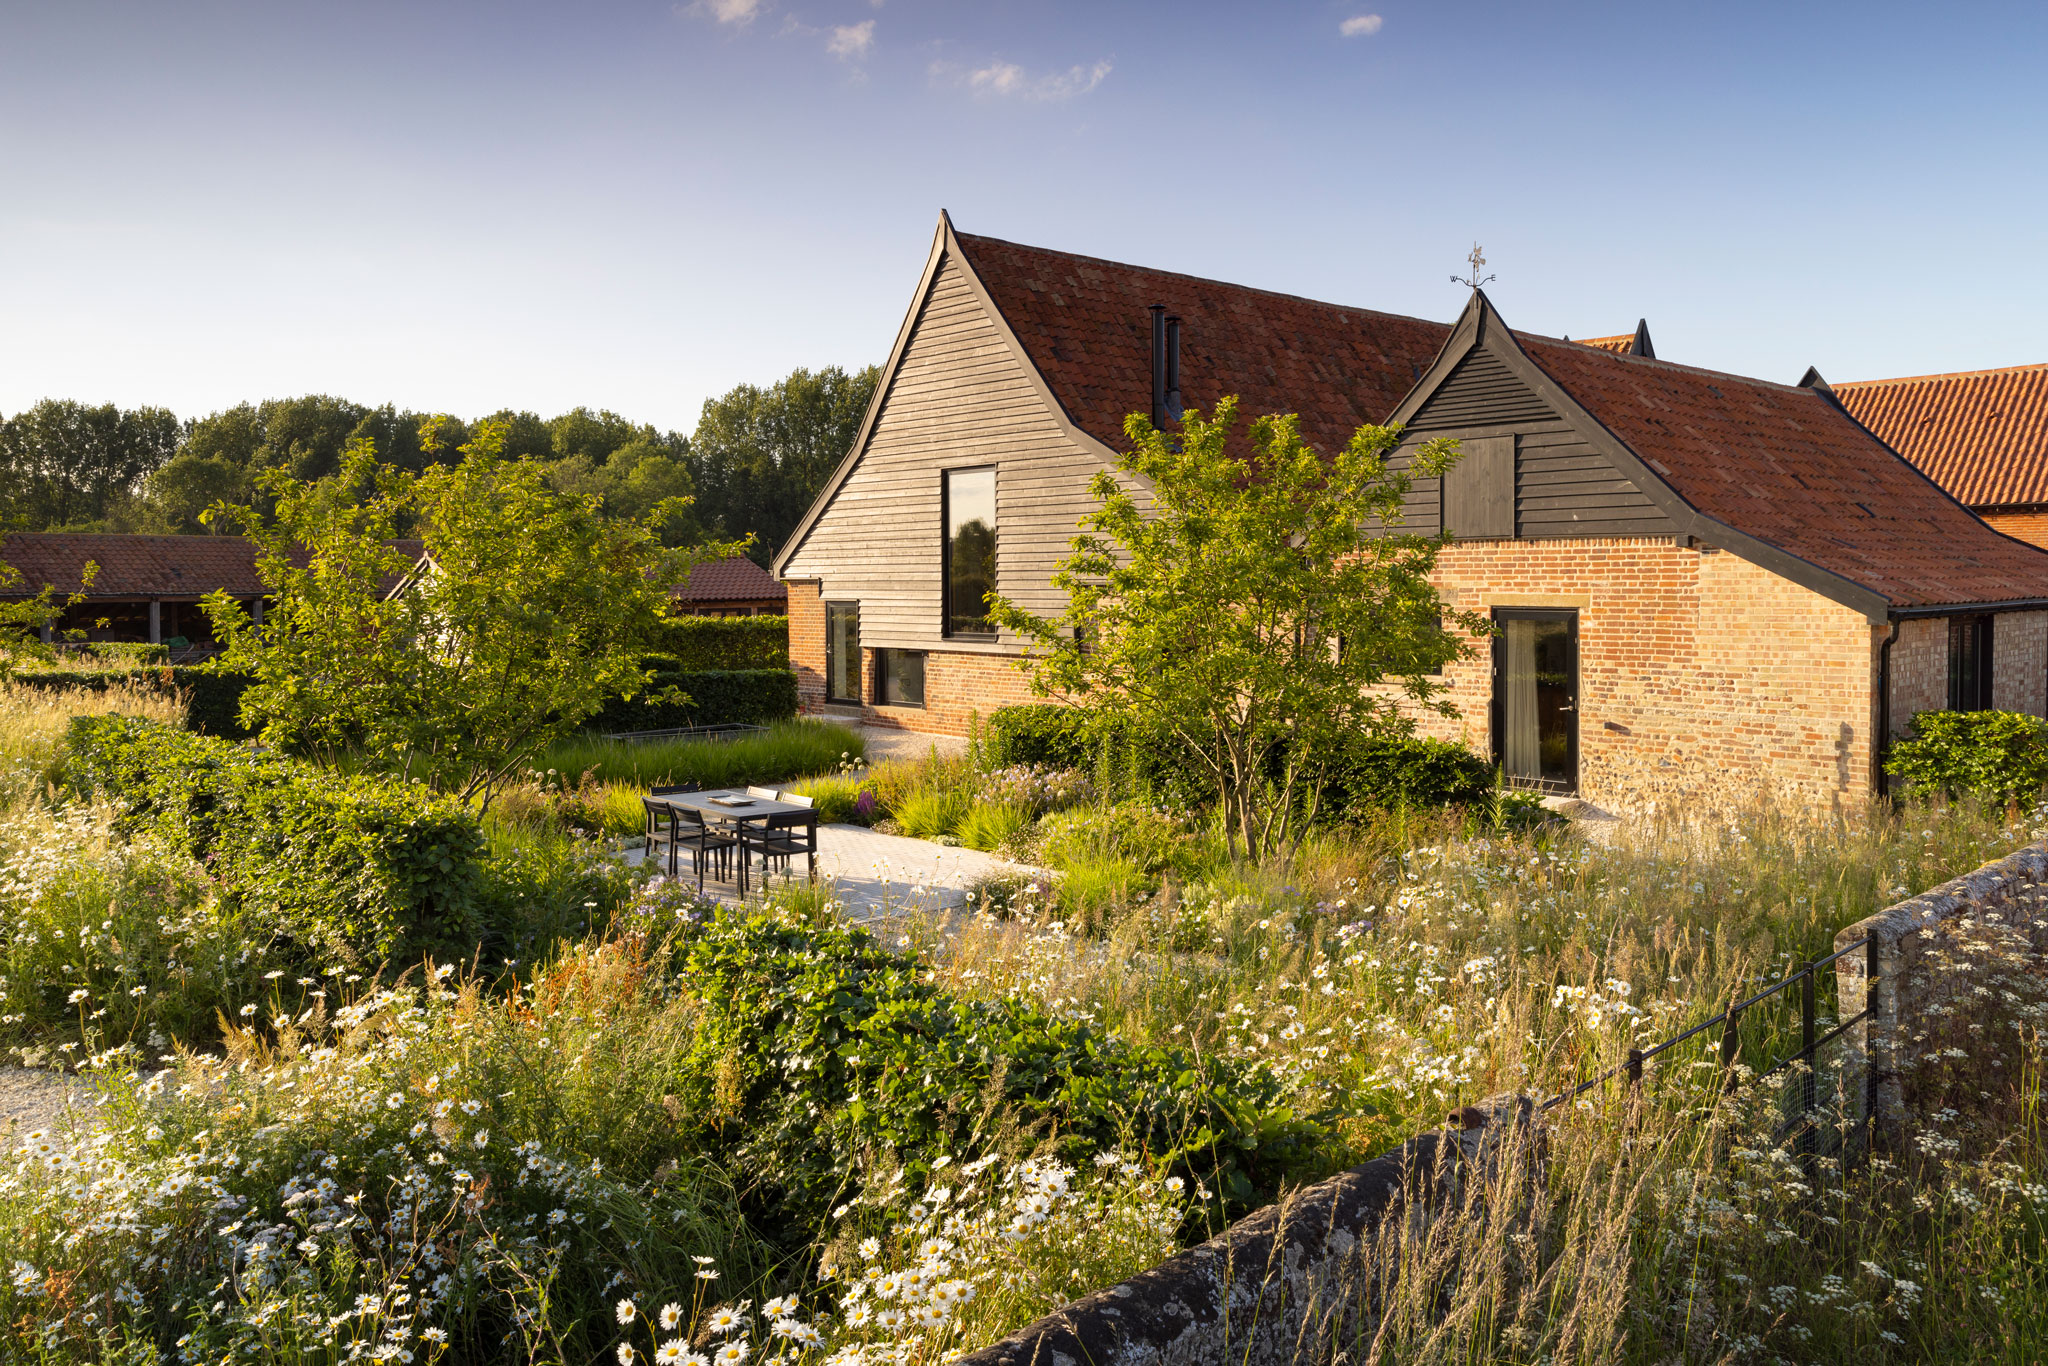 Colm Joseph suffolk walled garden converted barn modern home naturalistic planting design wildflower meadow beech hedge multi-stem crabapple trees seating area